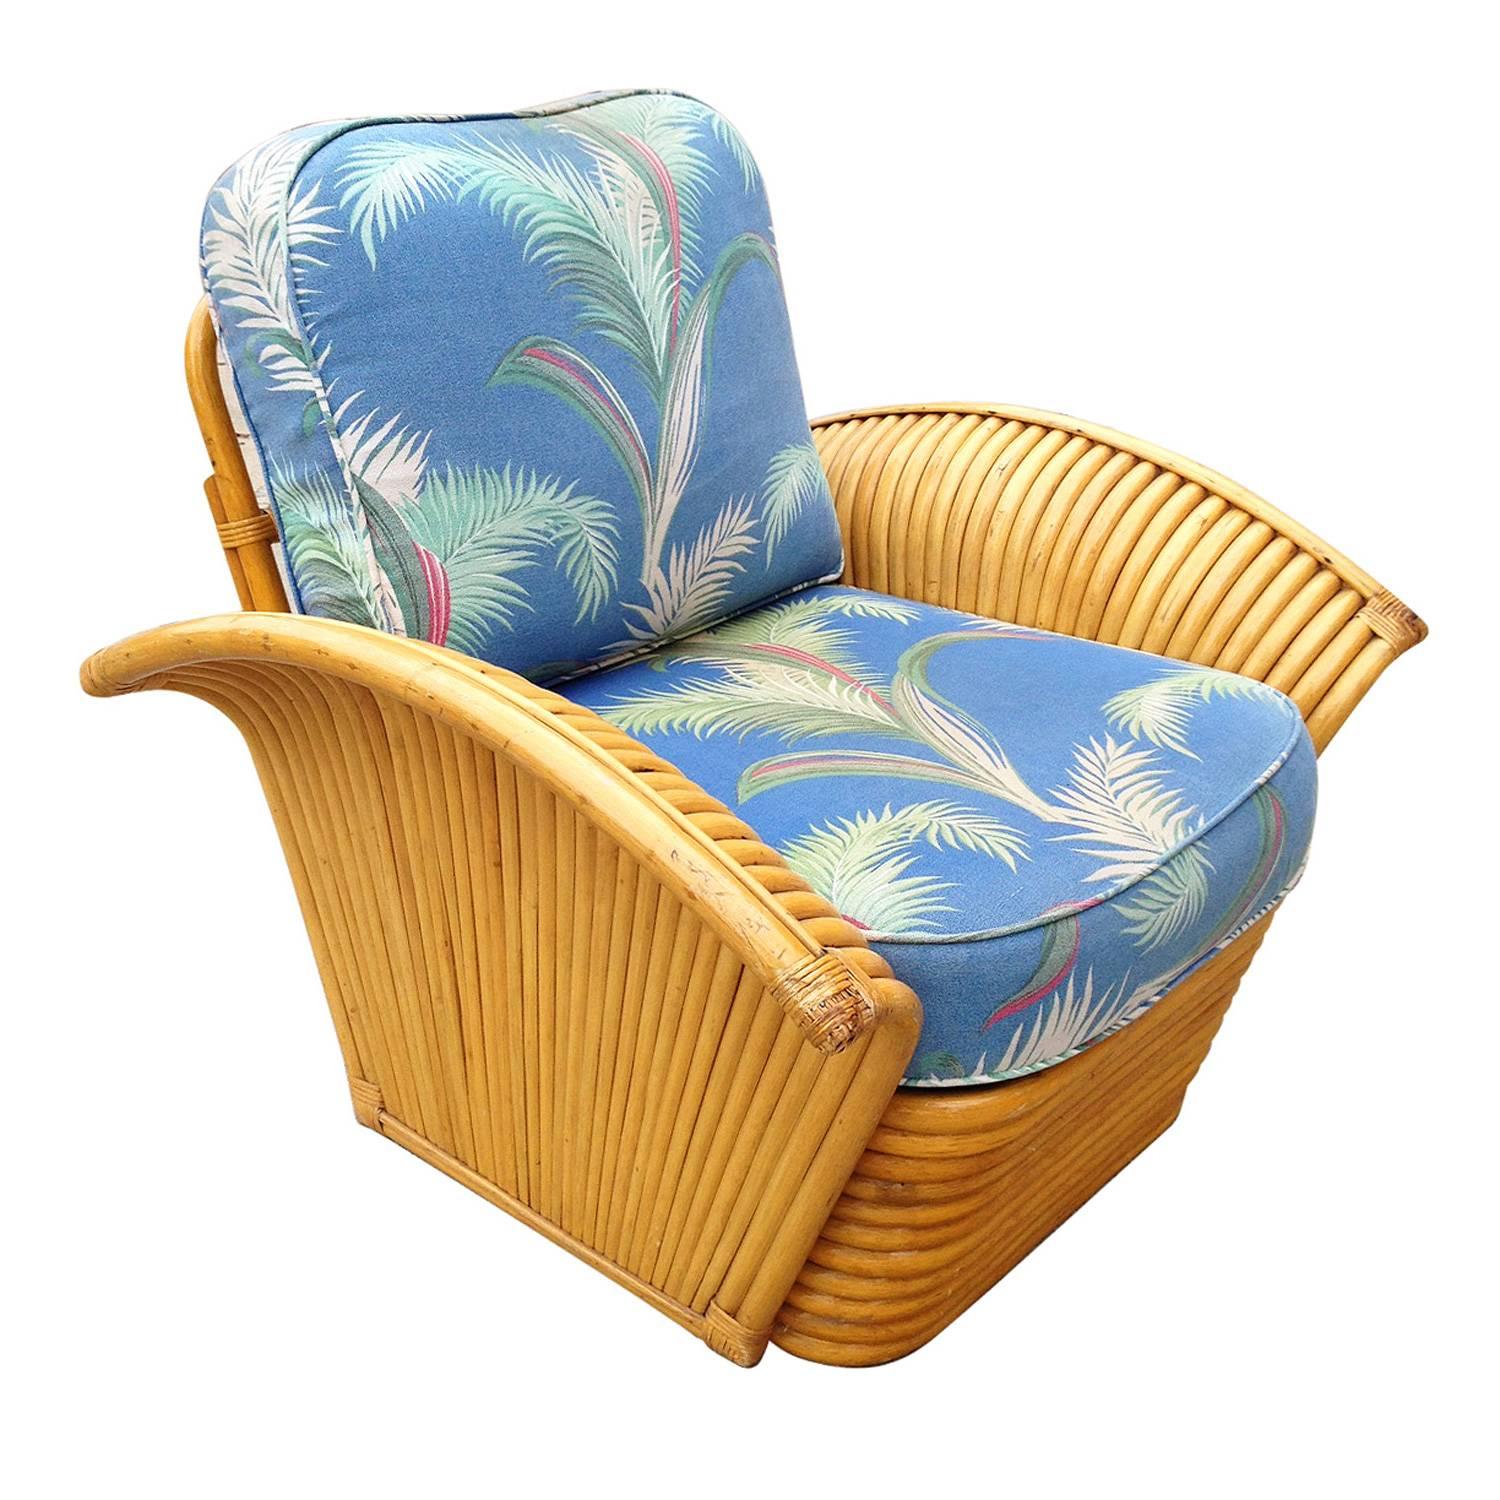 Original rattan fan arm lounge chair with ottoman.

Restored just for you


This chair can be seen in the living room of 